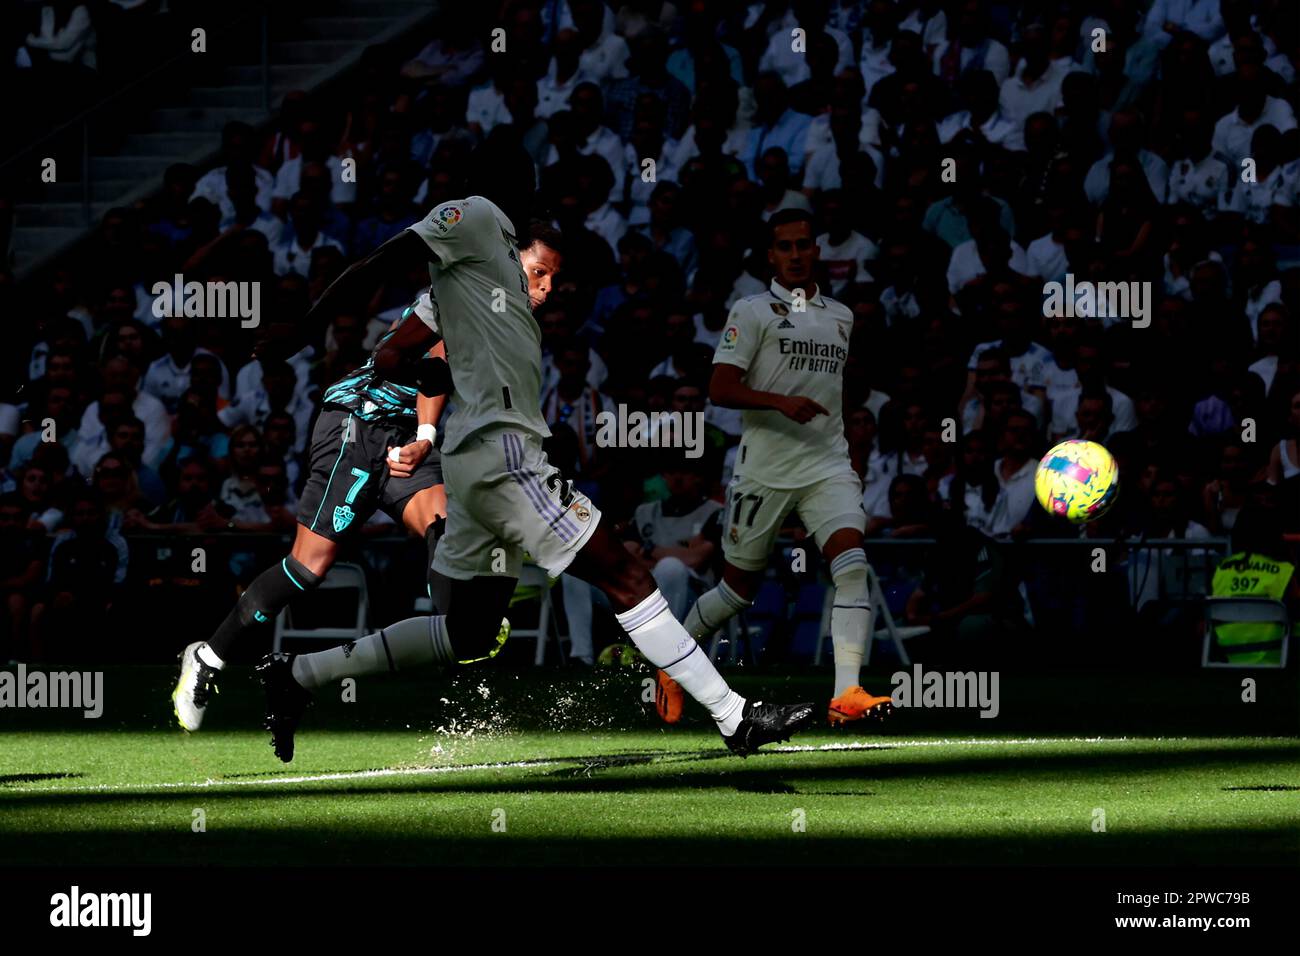 Madrid, Spain. 29th Apr, 2023. Madrid, Spain, 29.04.2023.- Almeria player Ramazani shot. Real Madrid vs Almeria match of the Spanish Soccer League on matchday 32 held at the Santiago Bernabeu Stadium in the capital of the Kingdom of Spain. Final result 4-2. Real Madrid goals from Benzema 2 ,17 , 42 (P), Rodrygo 47 . Goals from Almeria Lazaro Vinicius 40' 5, and Lucas Robertone 61' Credit: Juan Carlos Rojas/dpa/Alamy Live News Stock Photo